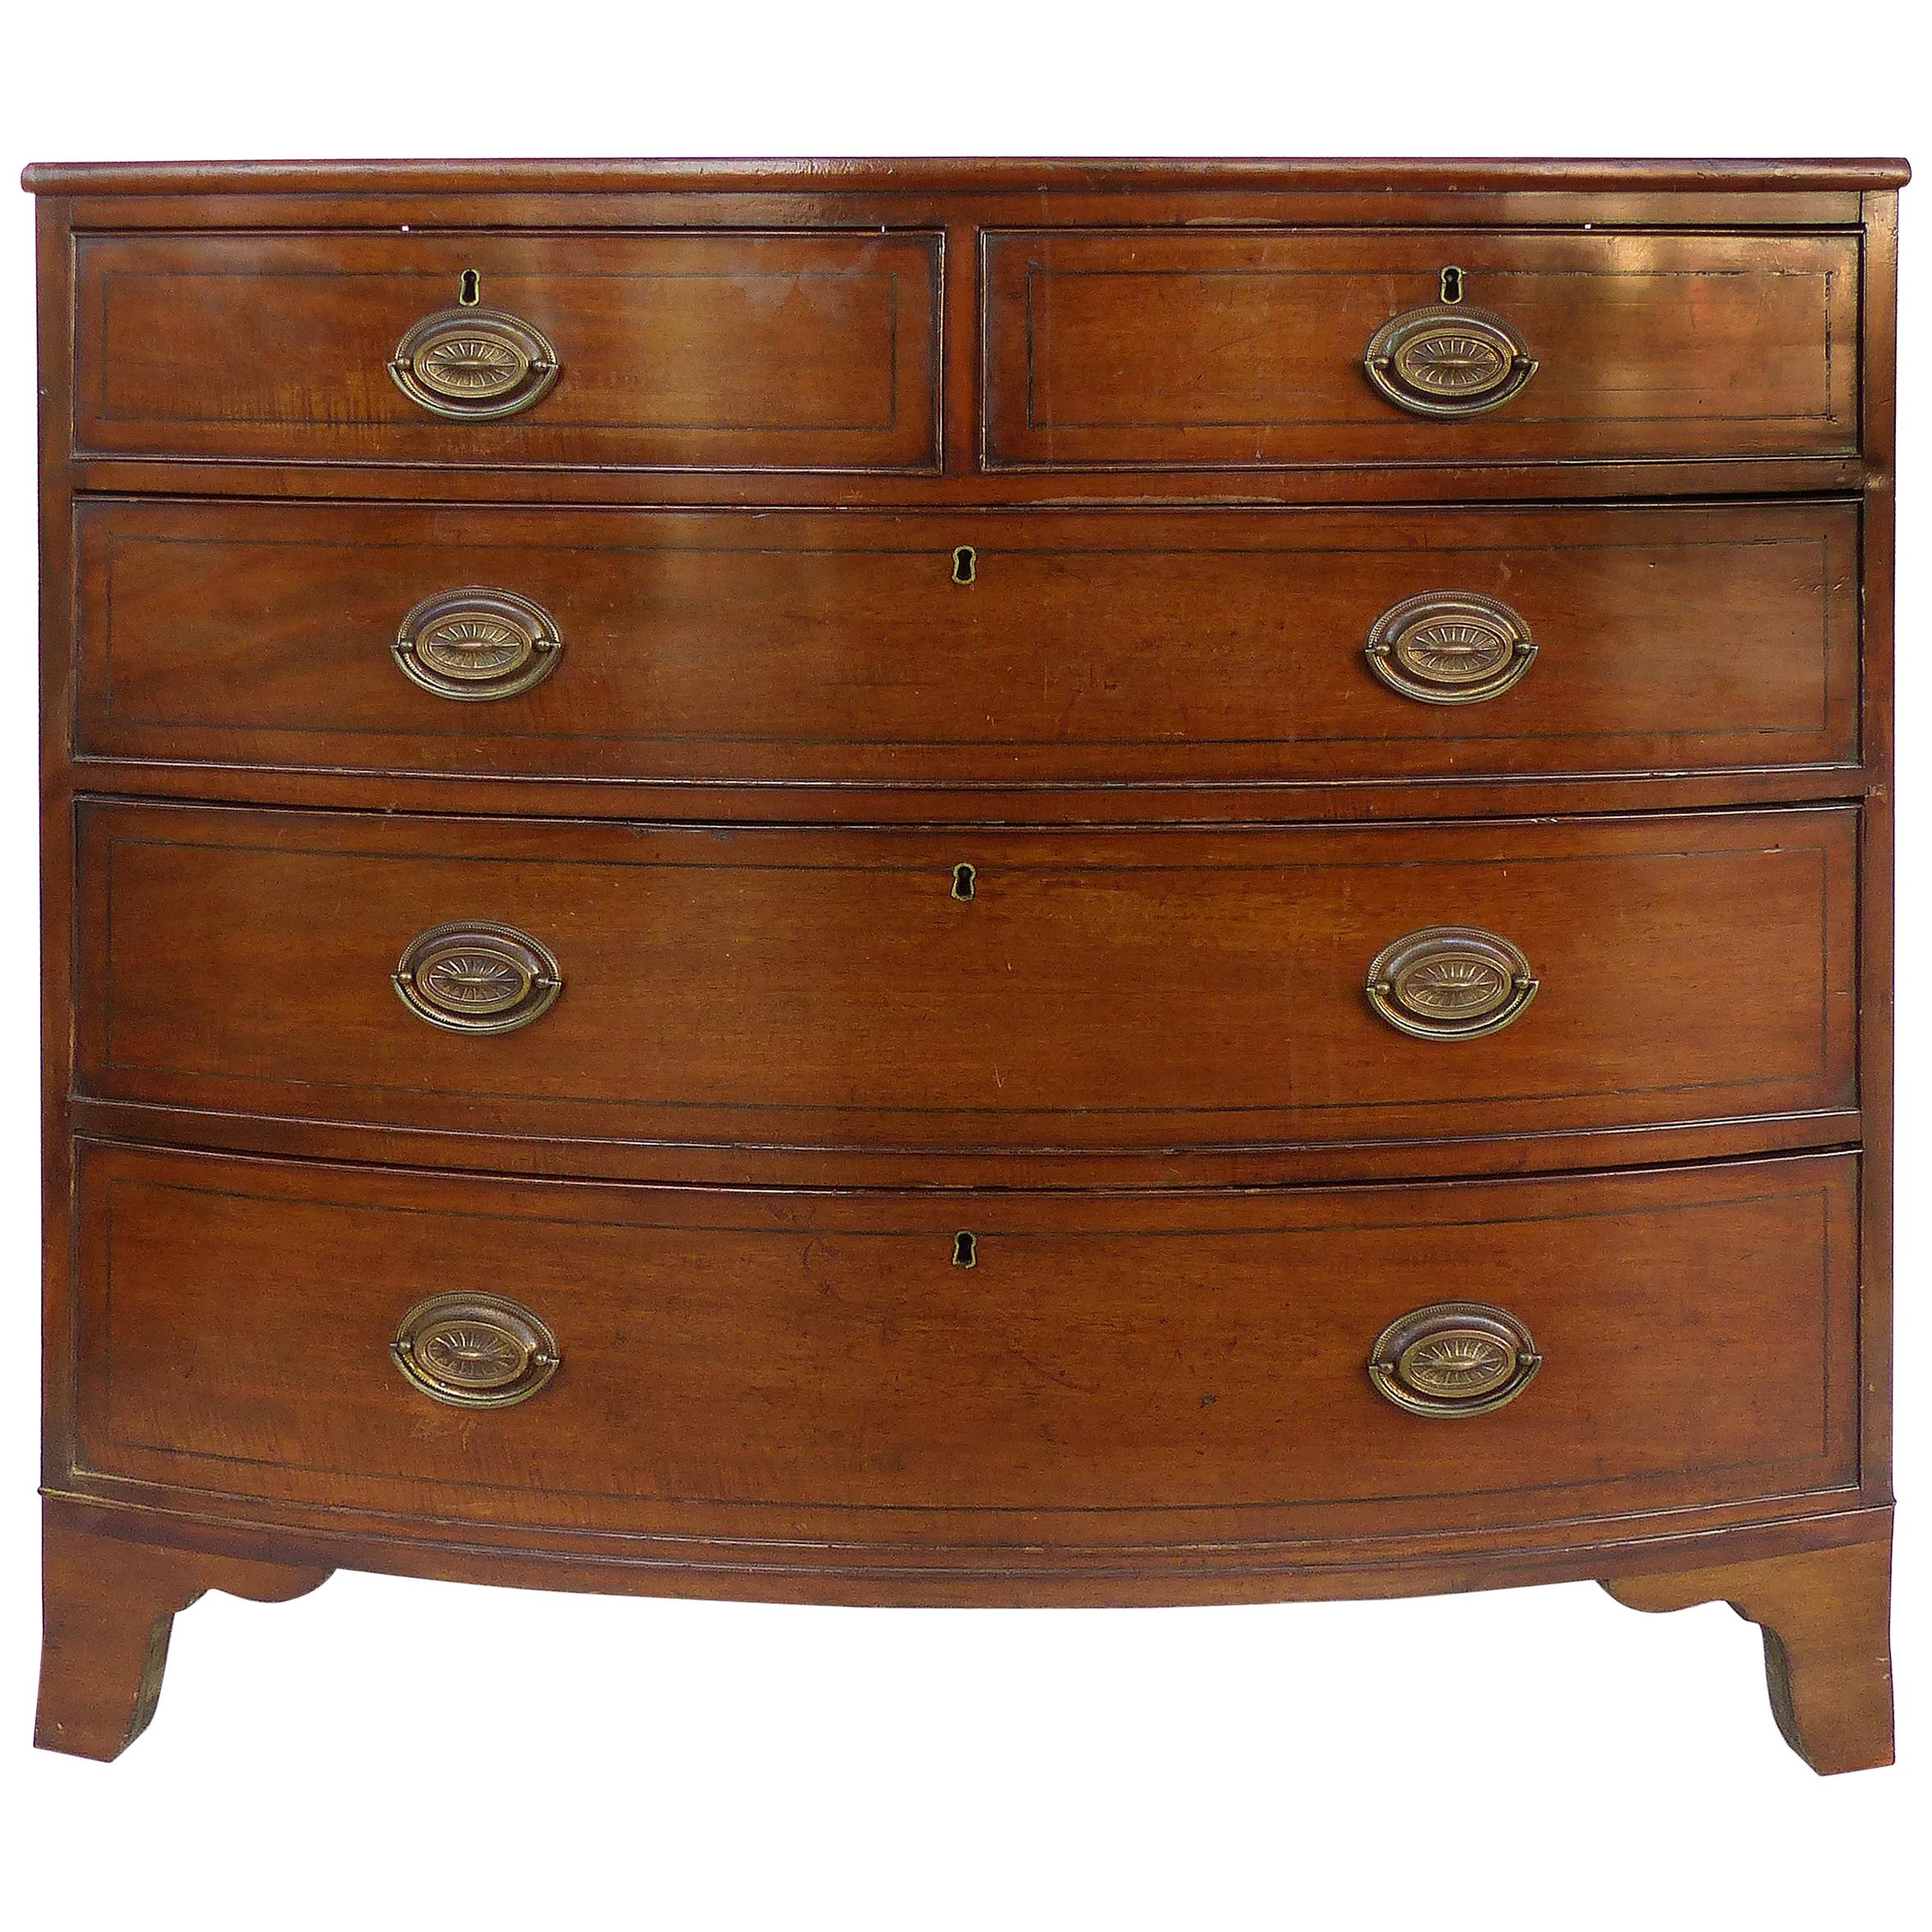 Antique Hepplewhite Bow-Front Chest of Drawers in Mahogany at 1stDibs |  hepplewhite dresser, hepplewhite chest of drawers, antique bow front chest  of drawers